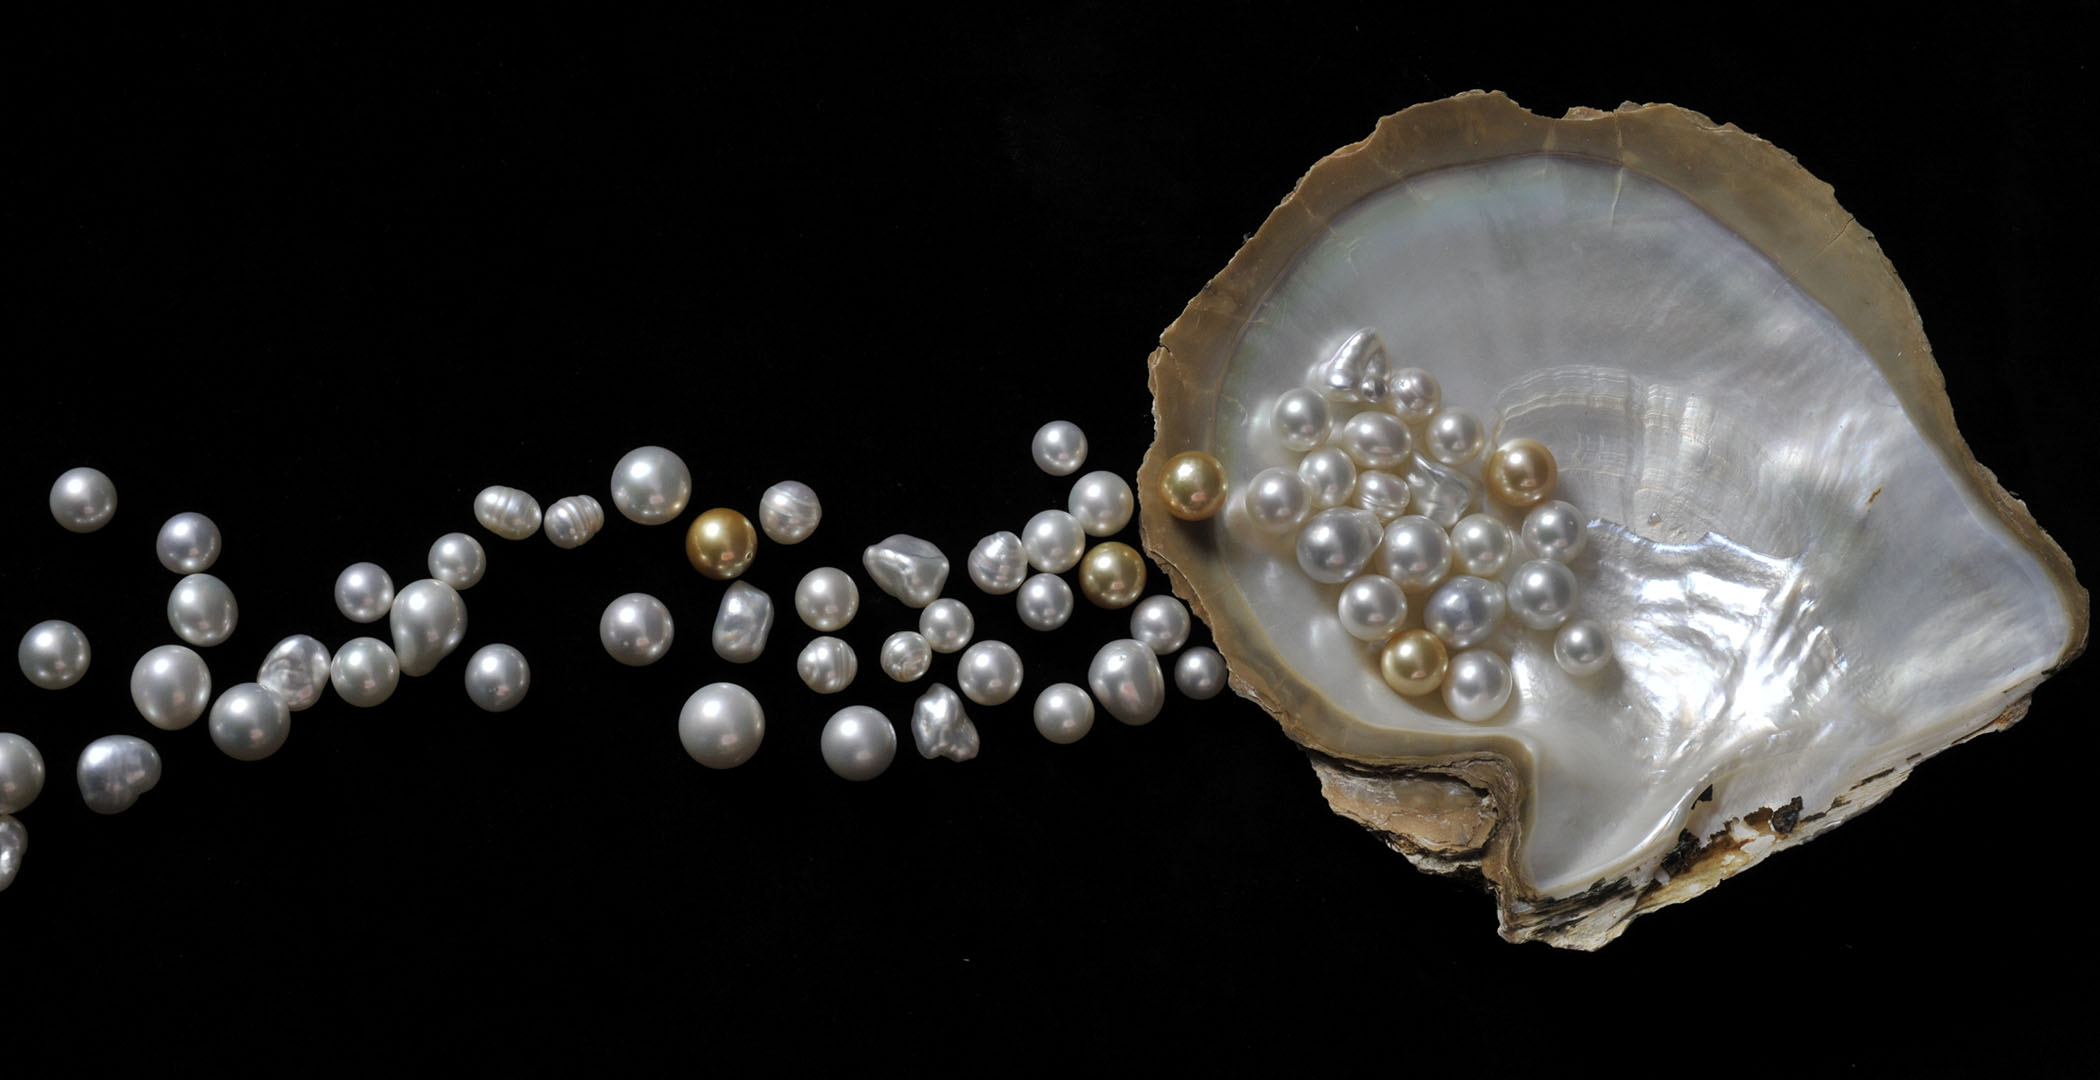 Lustre: Pearling and Australia traces the fascinating heritage of pearling across the north of Australia, from Shark Bay to the Torres Strait Islands.